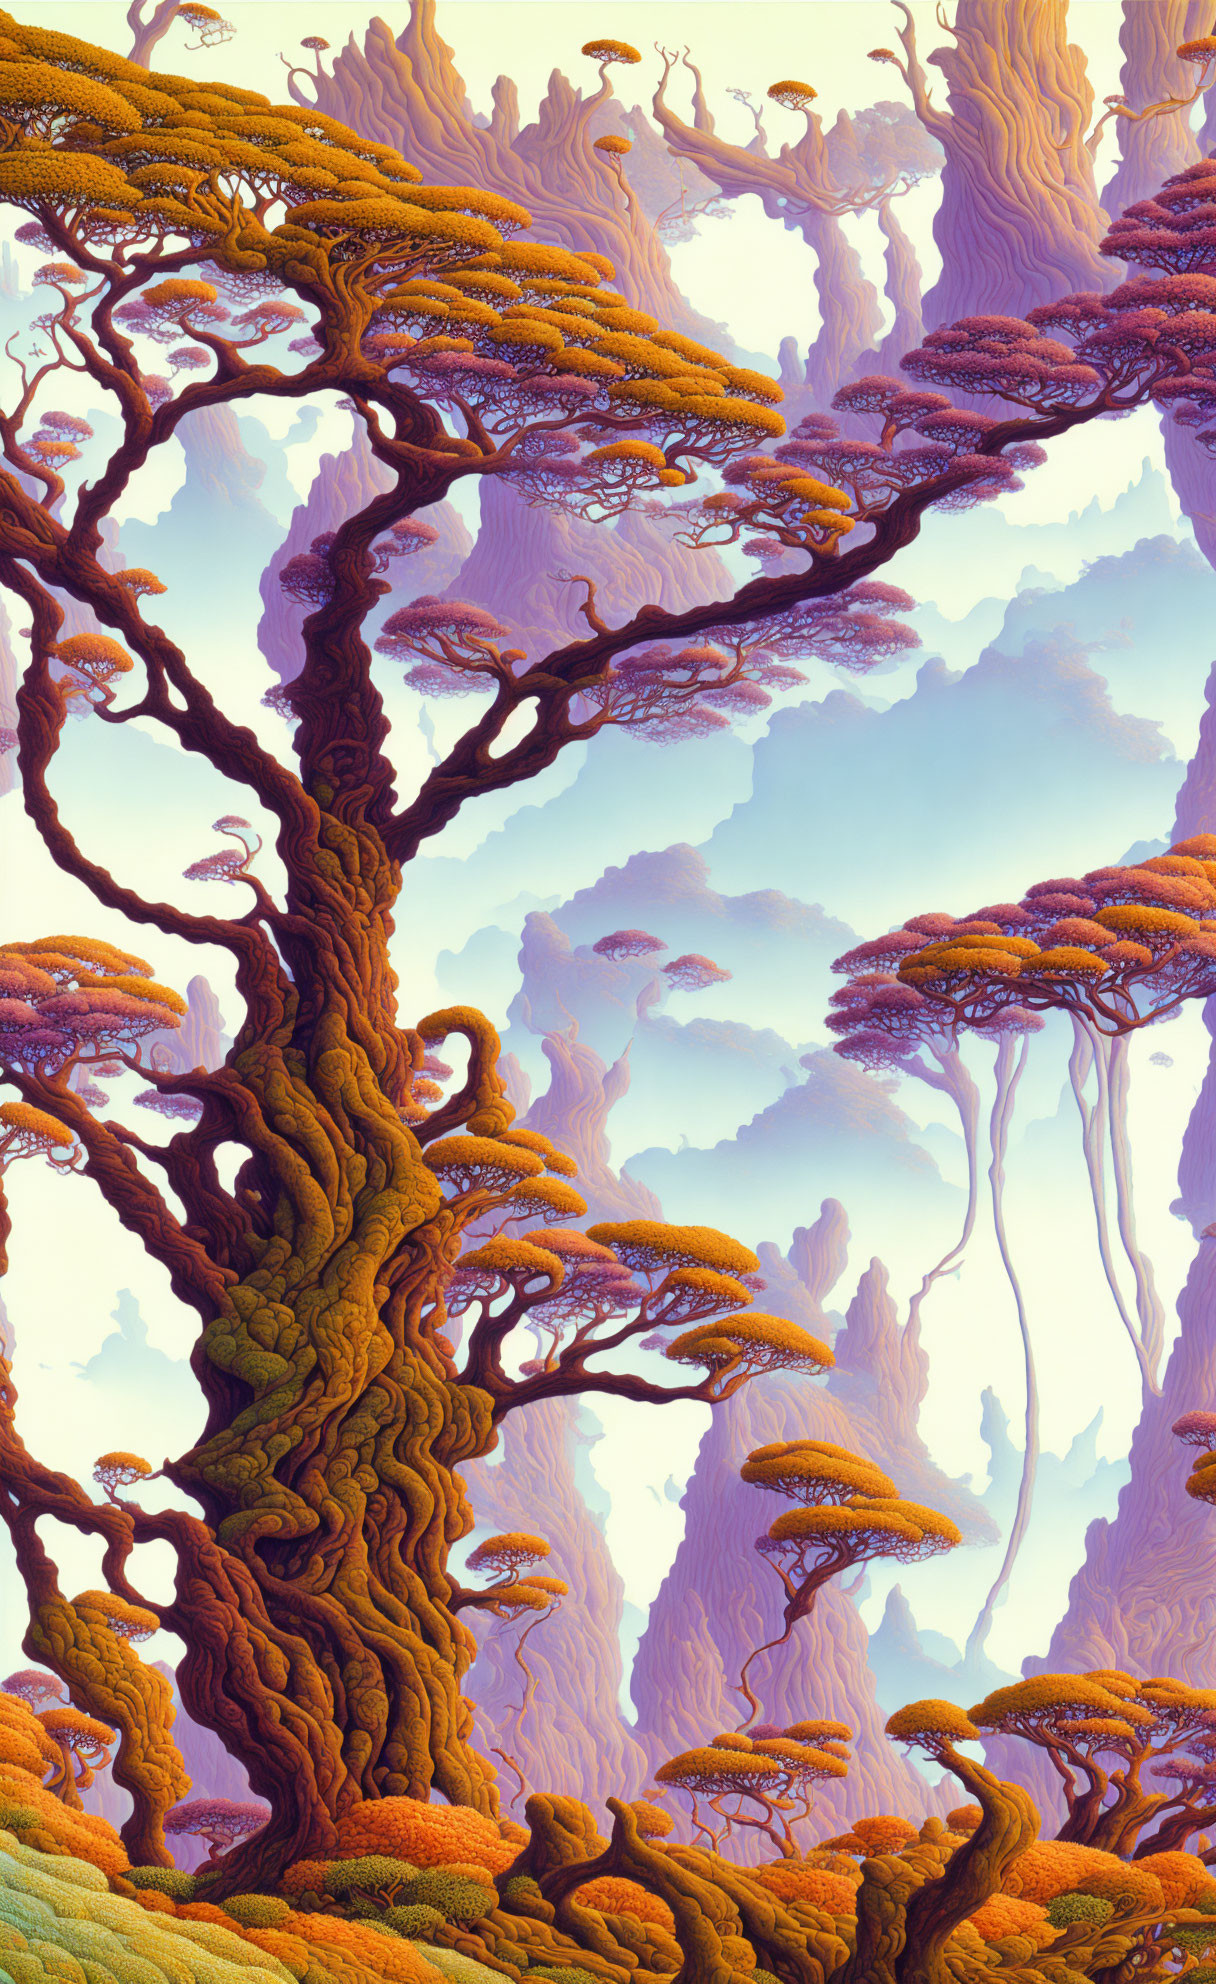 Twisted trees in surreal landscape with purple rocks & misty sky